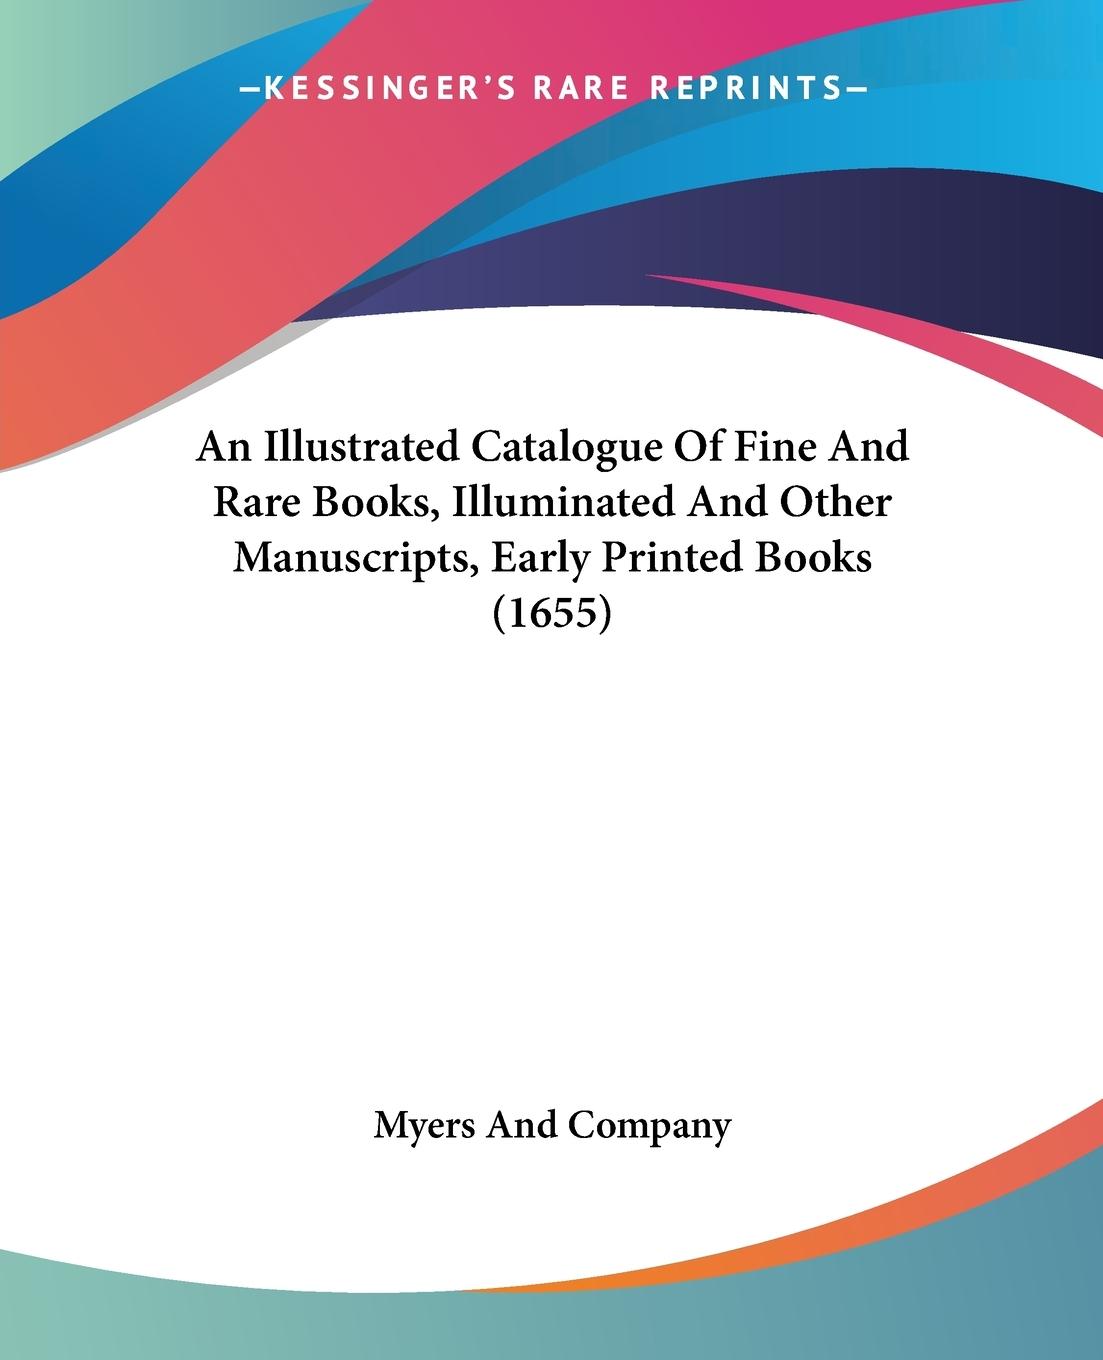 An Illustrated Catalogue Of Fine And Rare Books, Illuminated And Other Manuscripts, Early Printed Books (1655) - Myers And Company